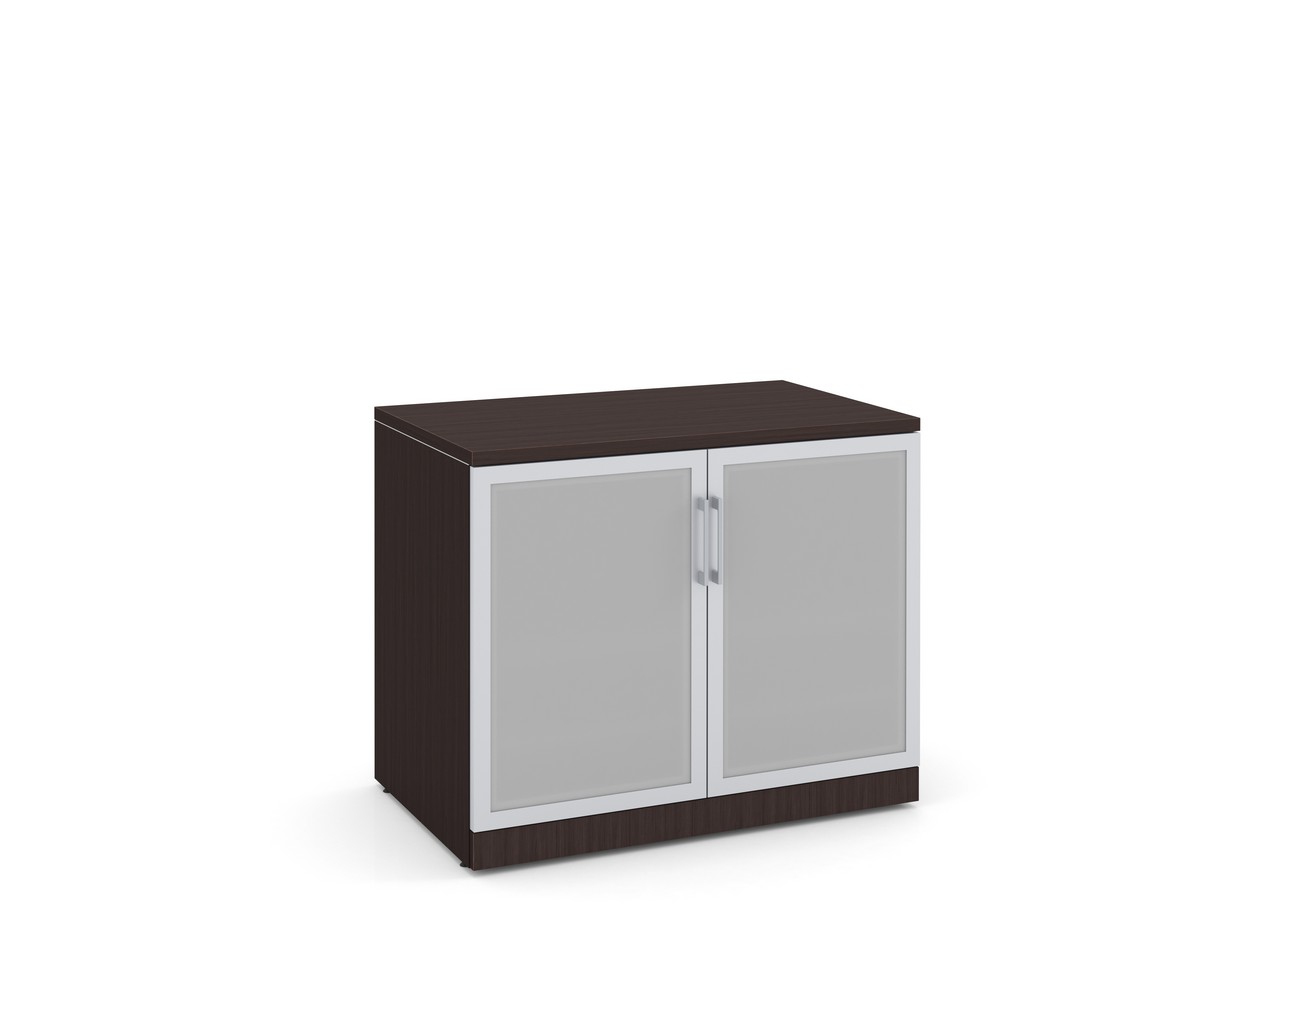 Glass Double Door Storage Cabinet 29.5 Inch with Espresso Finish